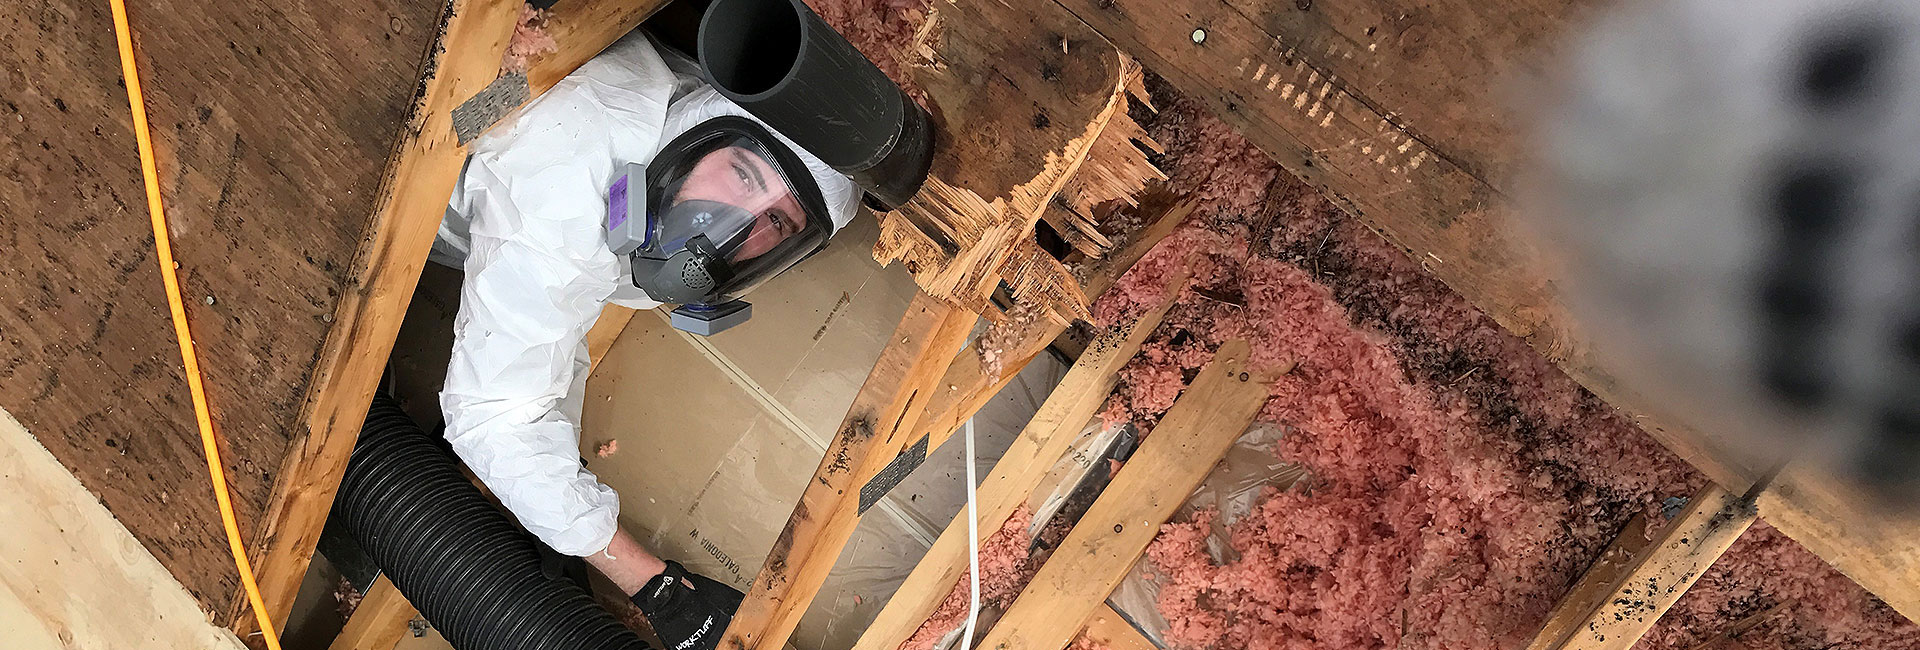 insulation removal and mould remediation